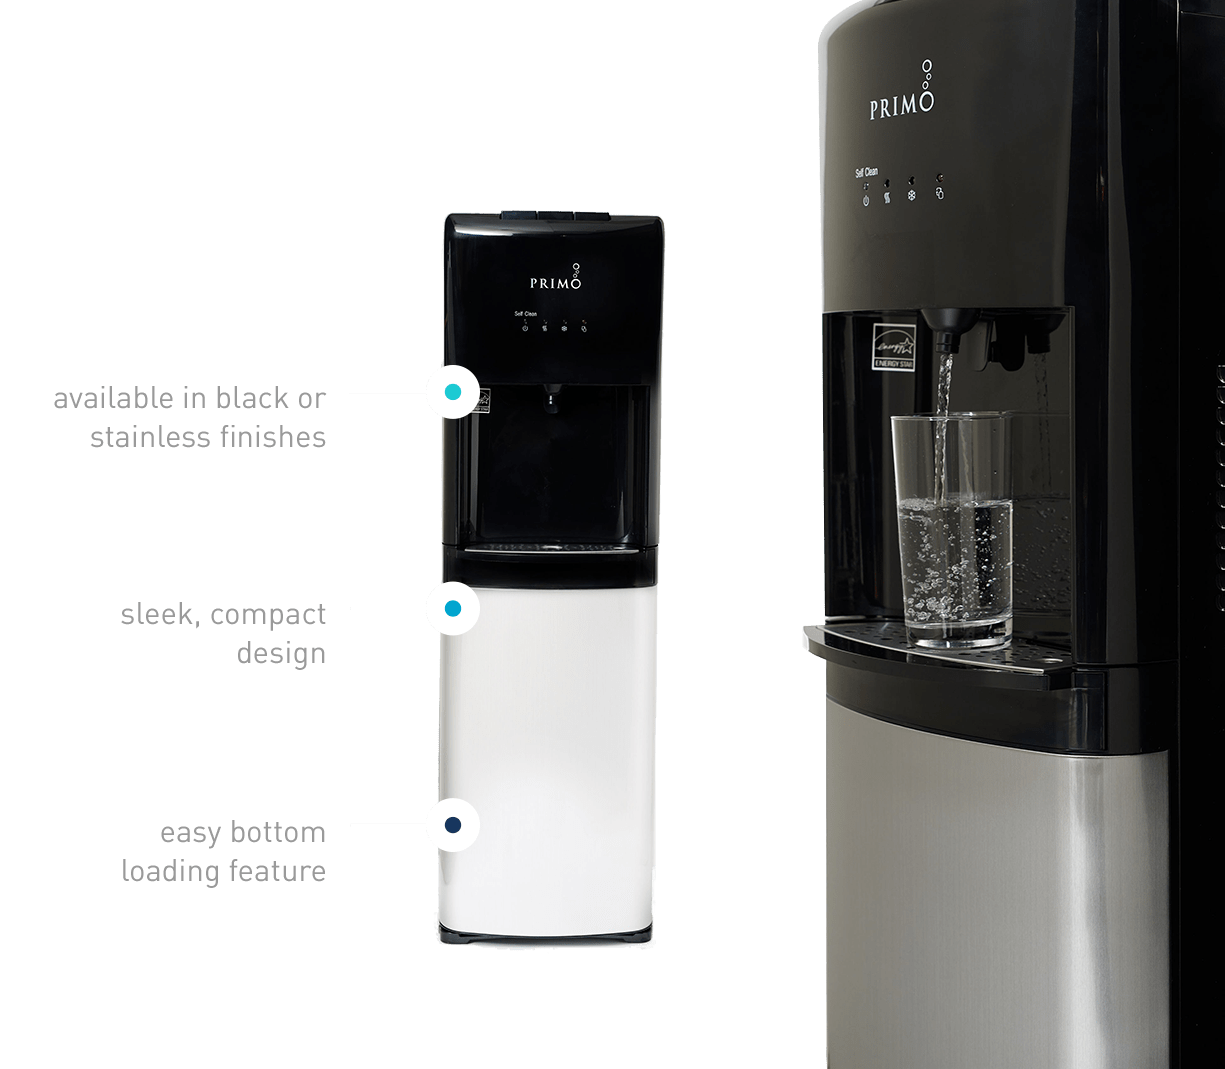 Bottom Loading Water Jug, Bulk Water Bottle Dispensers: Available in black or stainless finishes. Sleek, compact design. Easy bottom loading feature.